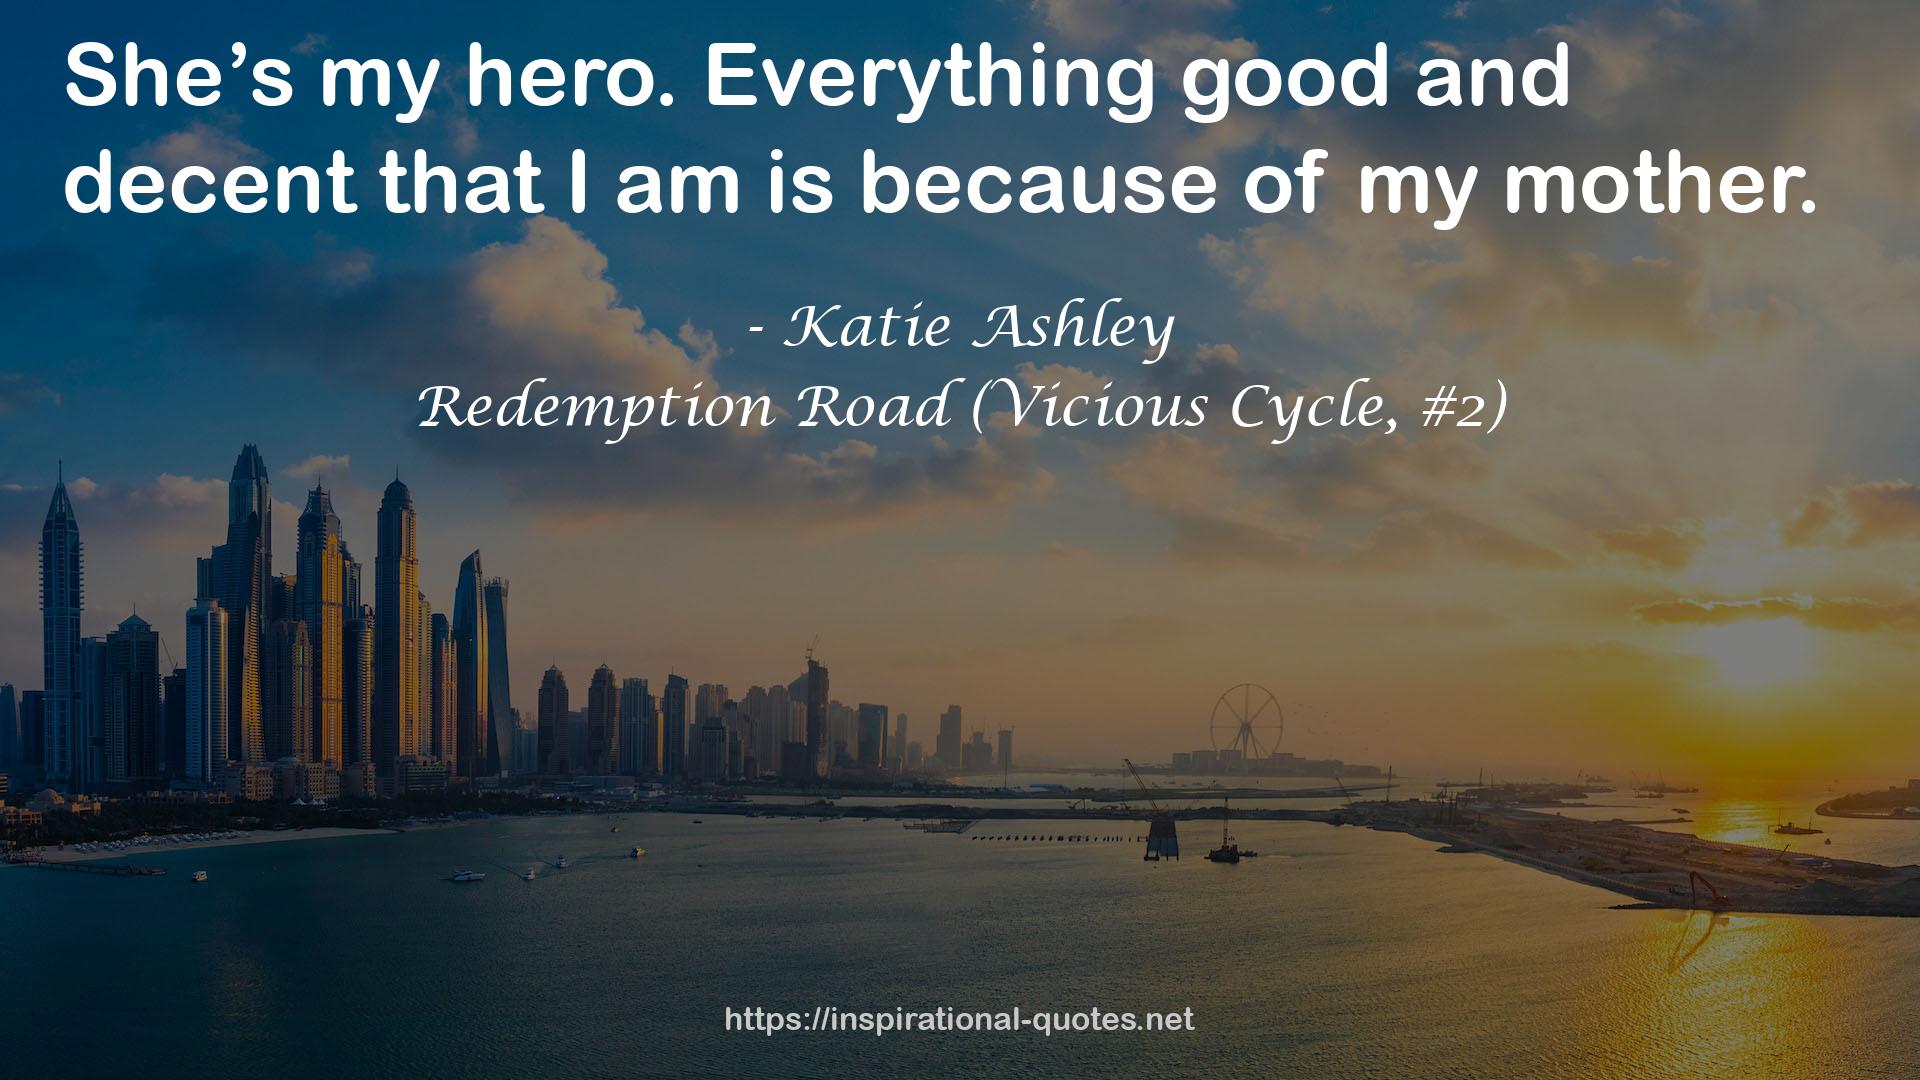 Redemption Road (Vicious Cycle, #2) QUOTES